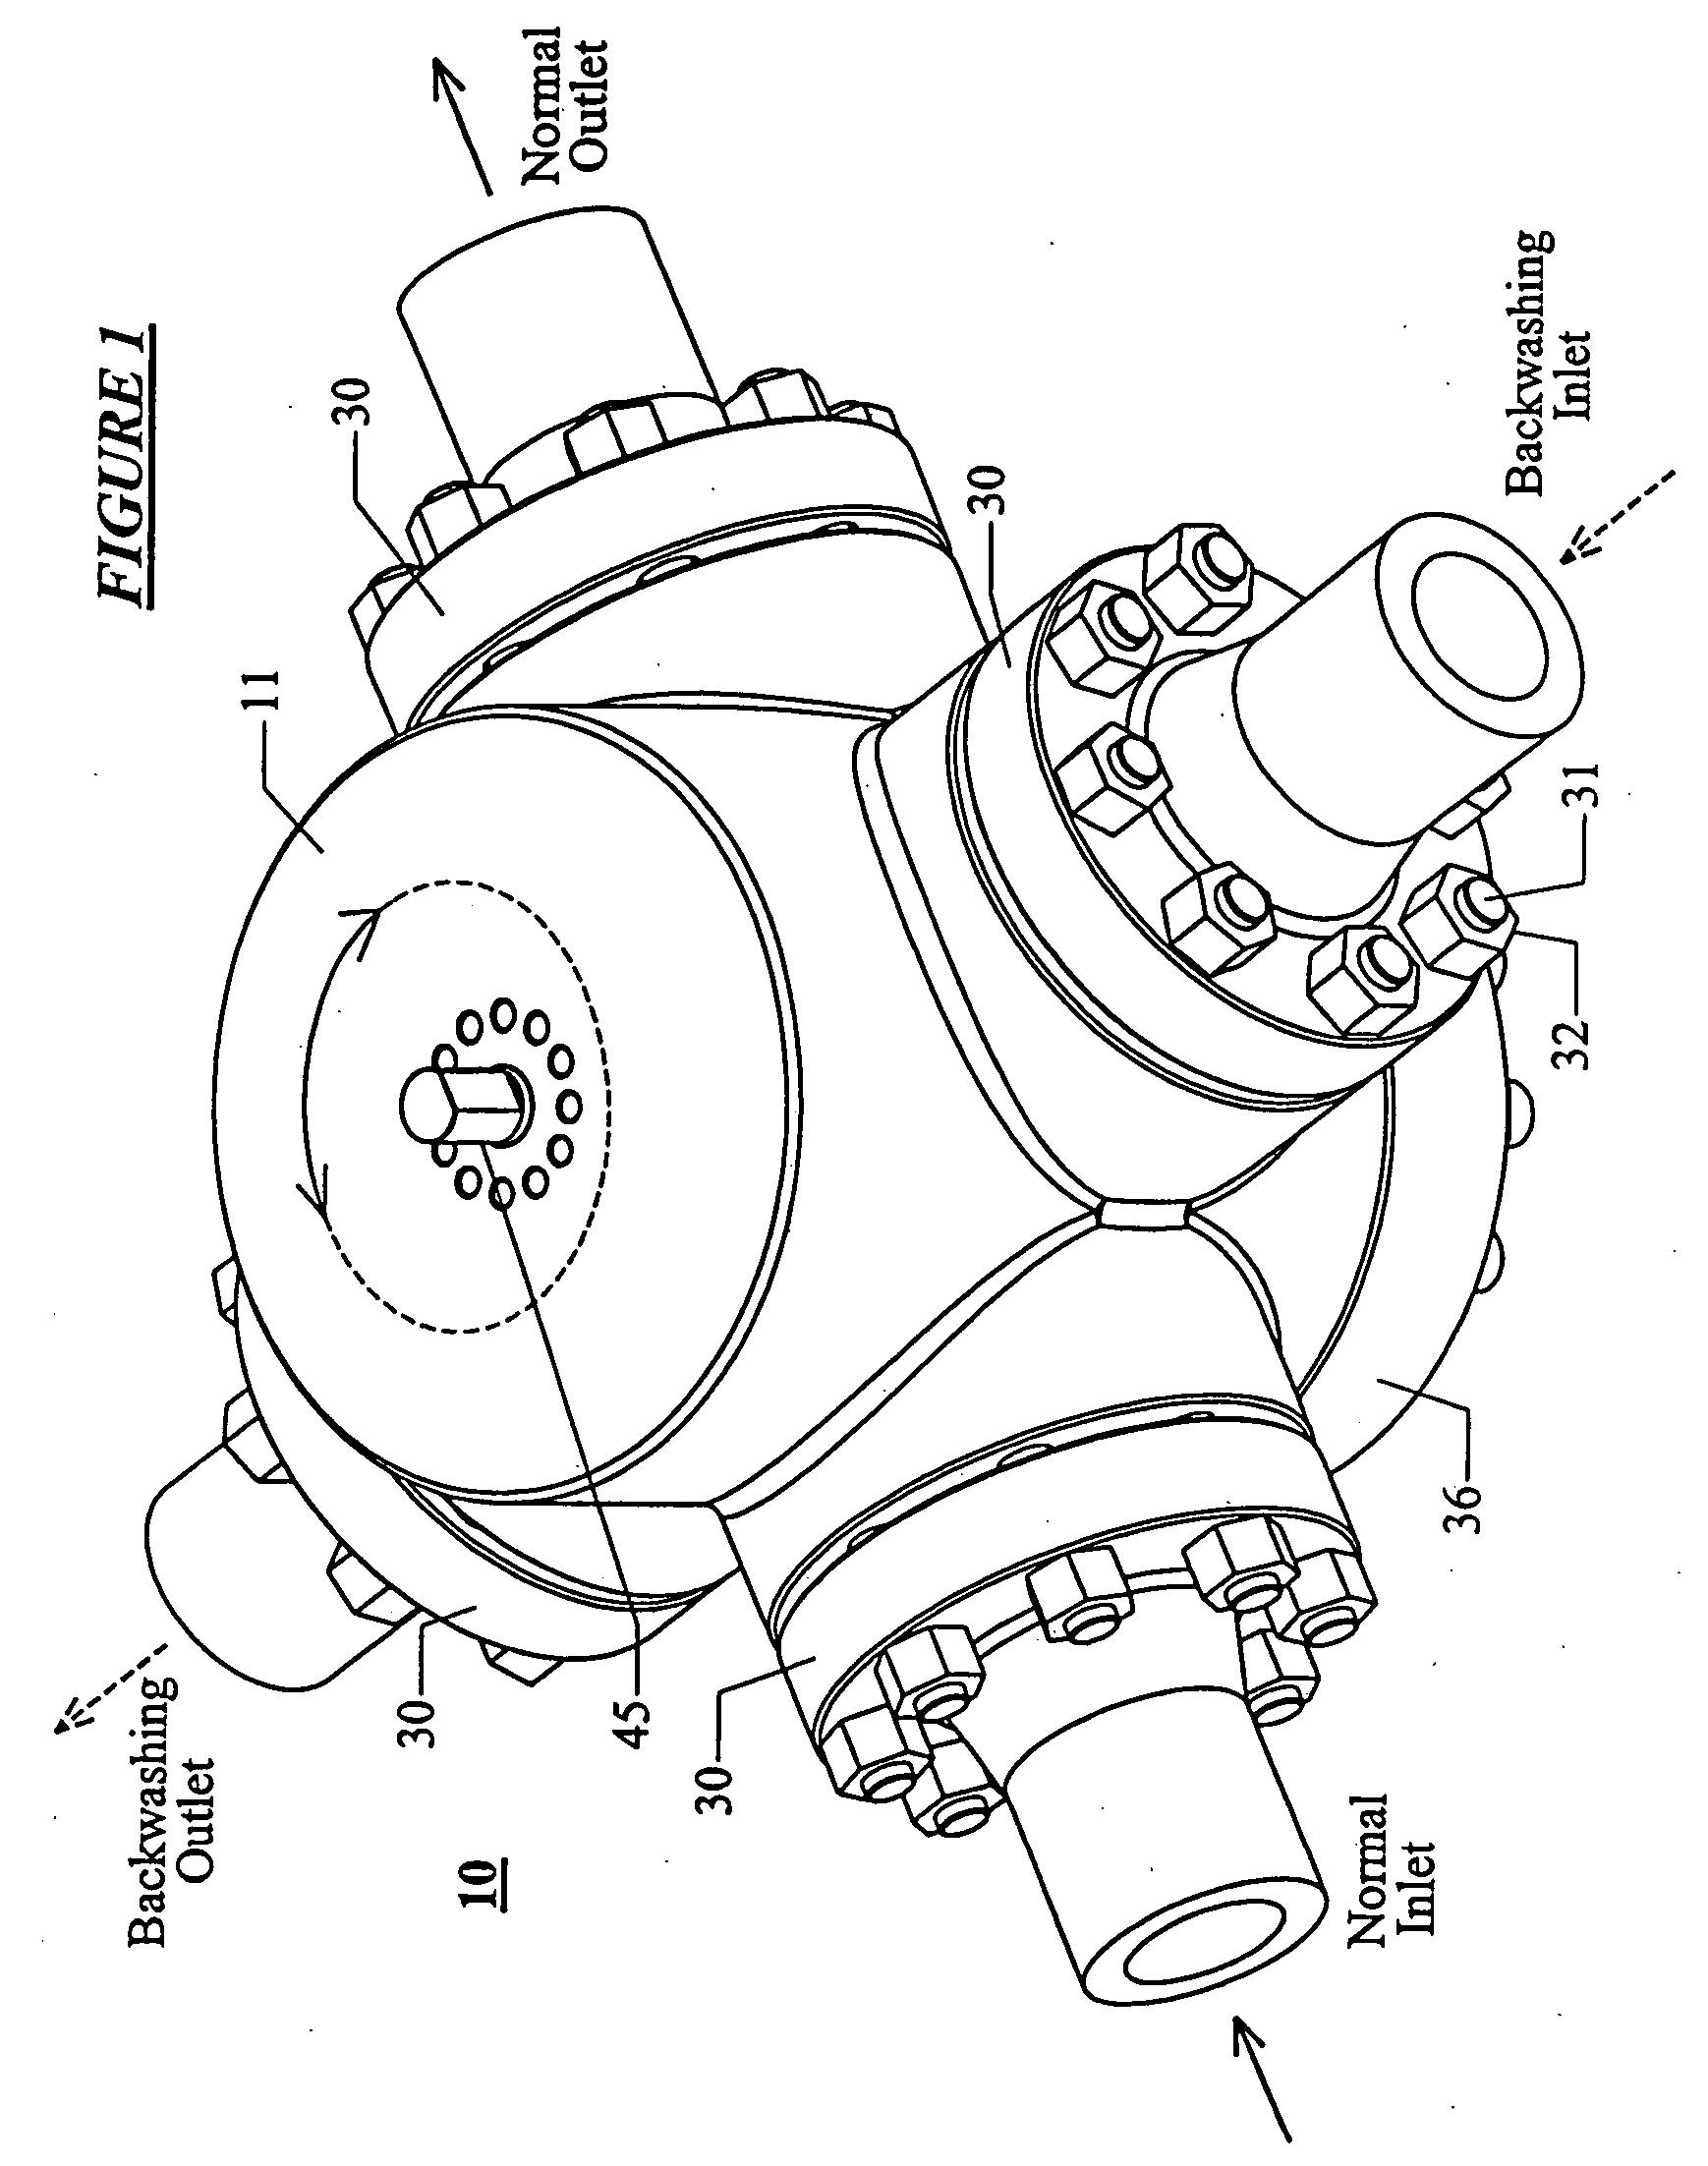 Solids strainer system for a hydraulic choke